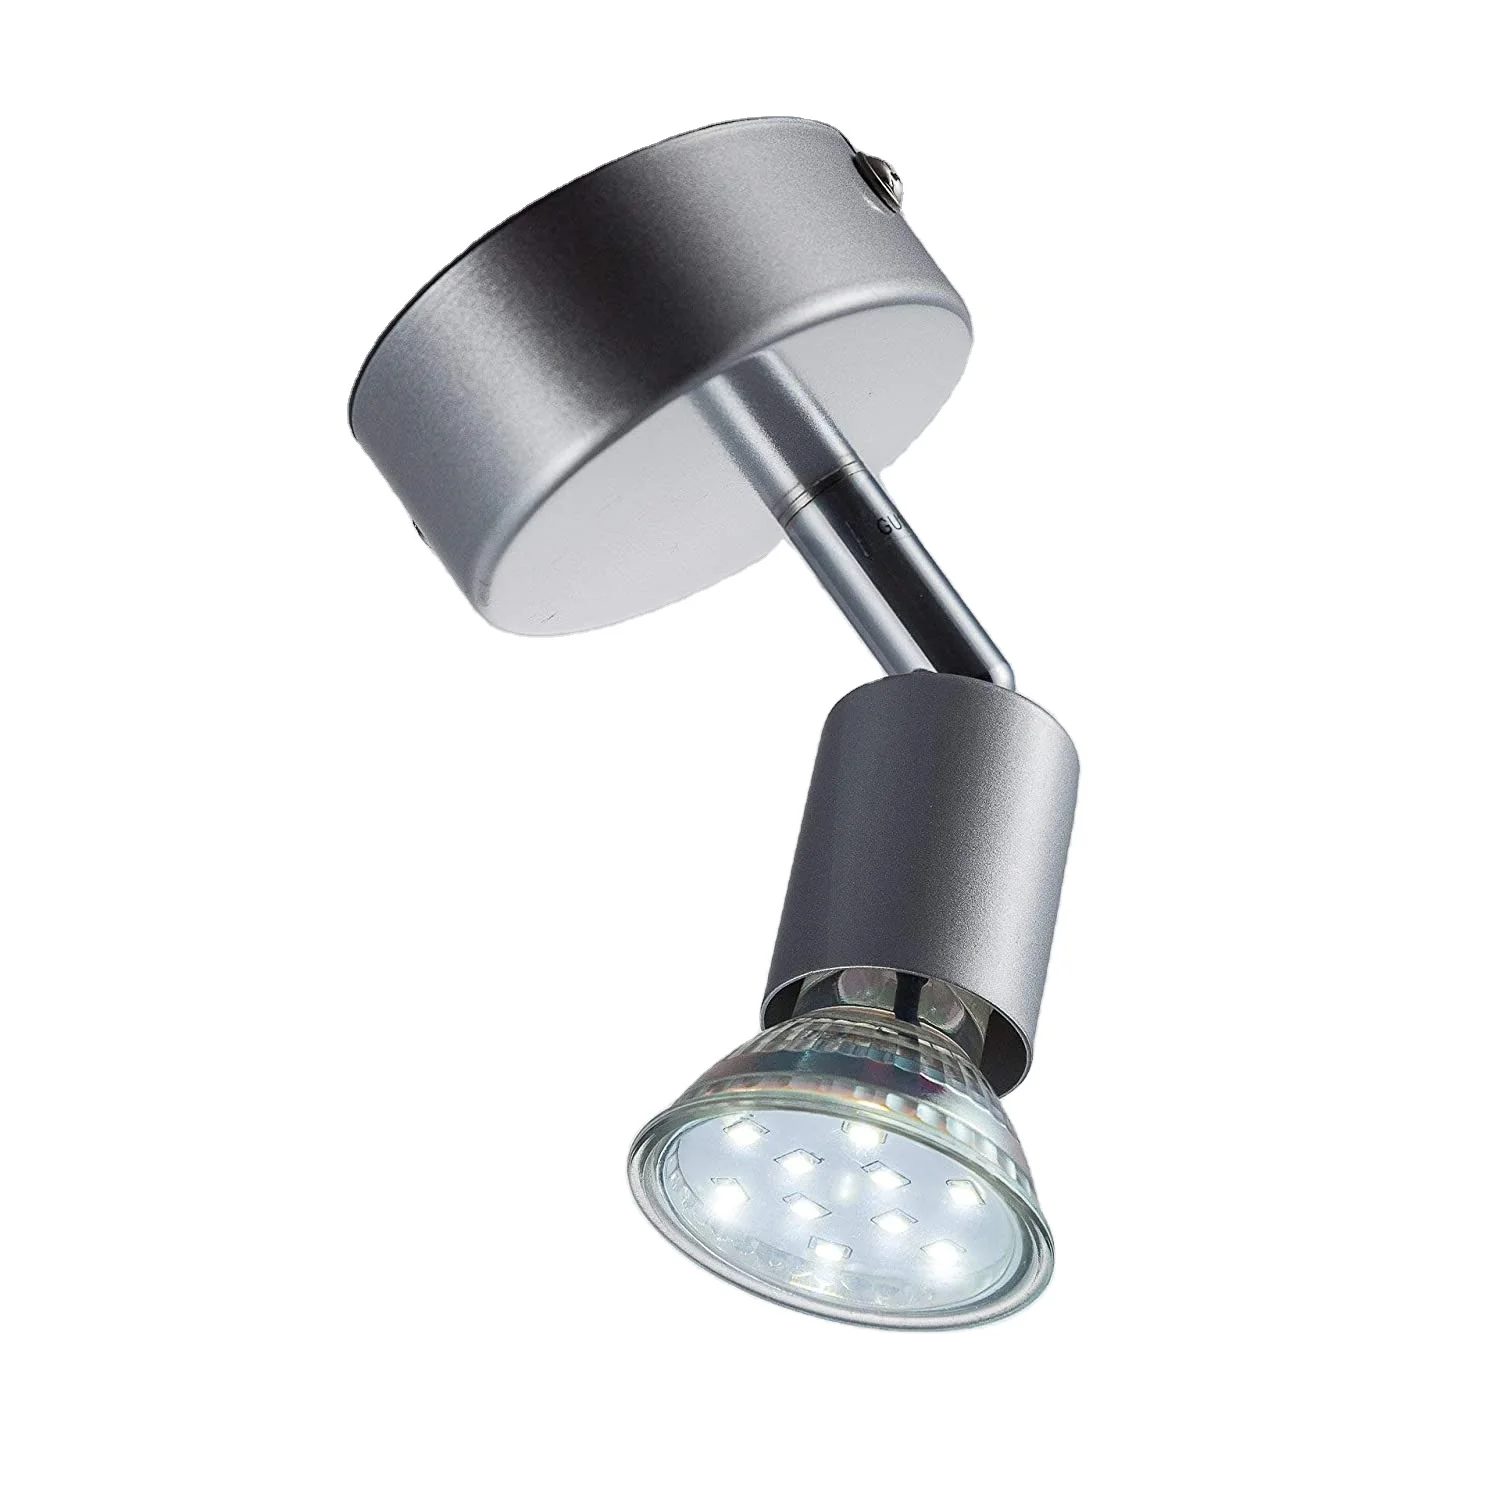 Hot selling design  LED Ceiling Light I Wall Spot Light with 3 W GU10 Warm White Pivoting 1 Bulb